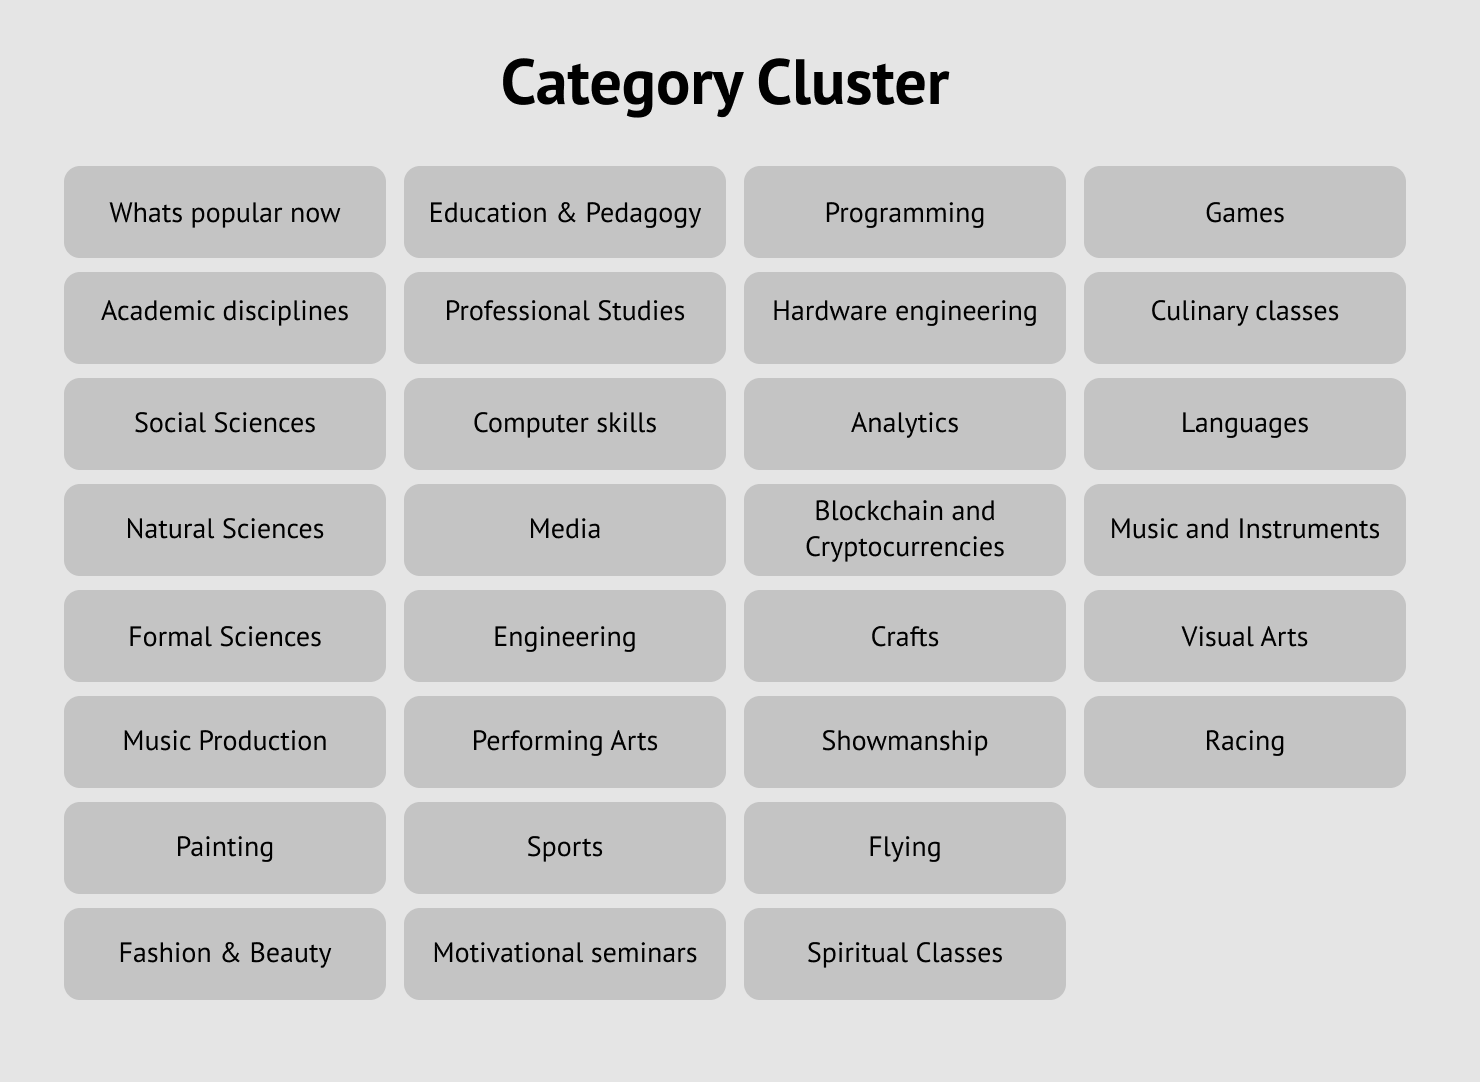 categories of offered activities